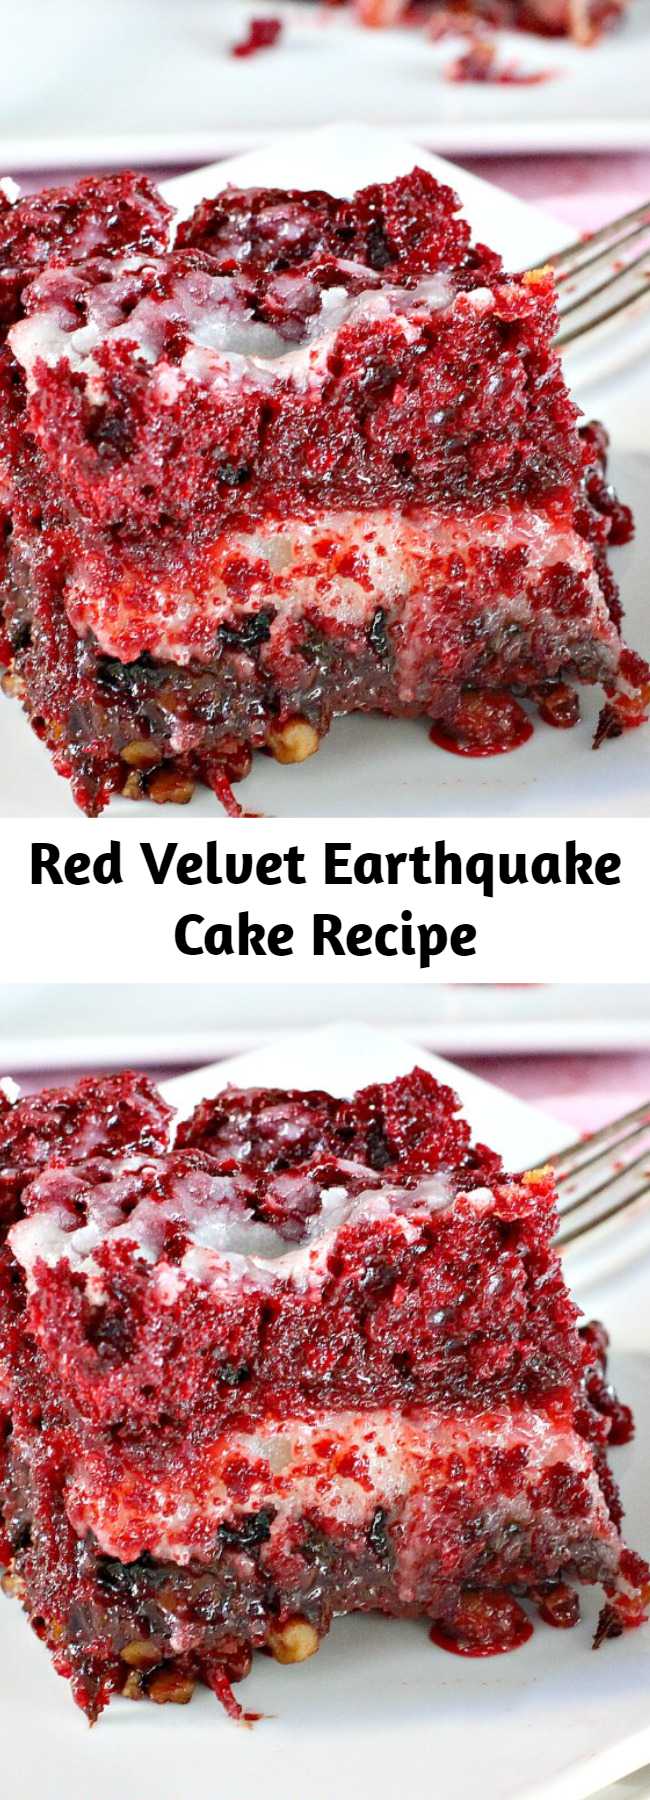 This delectable cake recipe calls for a Red Velvet cake batter and a cheesecake layer over top of pecans, coconut and chocolate chips. While baking the cake undergoes a seismic shift which explains its name. Fabulous for Christmas and Valentine's Day or other holiday baking. It is phenomenal! #dessert #redvelvet #cake #holidays #Christmas #ValentinesDay #chocolate #cheesecake